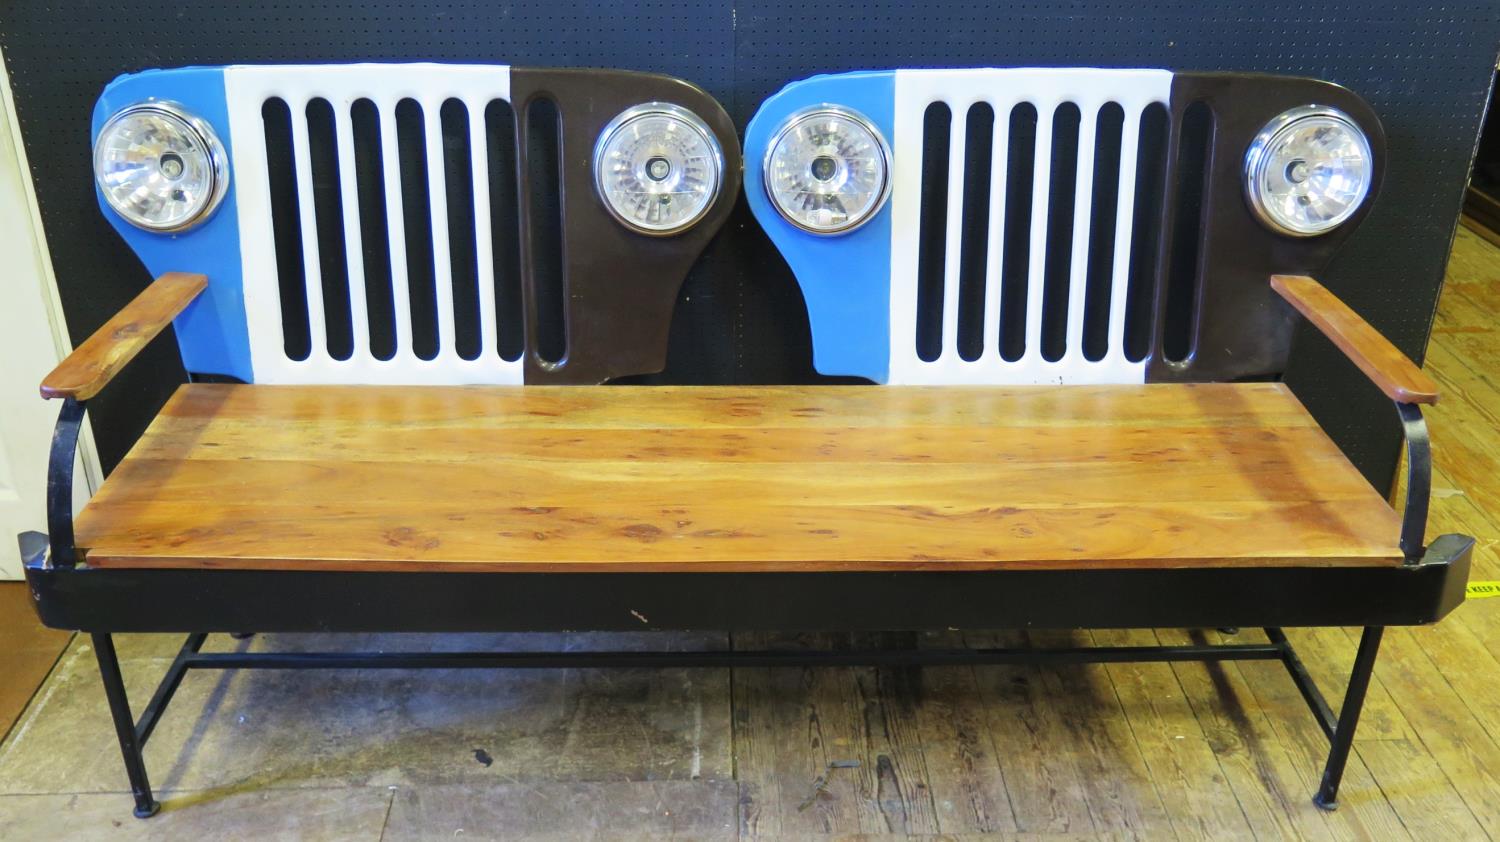 A Large Double 'Jeep' Grill Bench (lights can be wired up), 2m long - Image 2 of 2